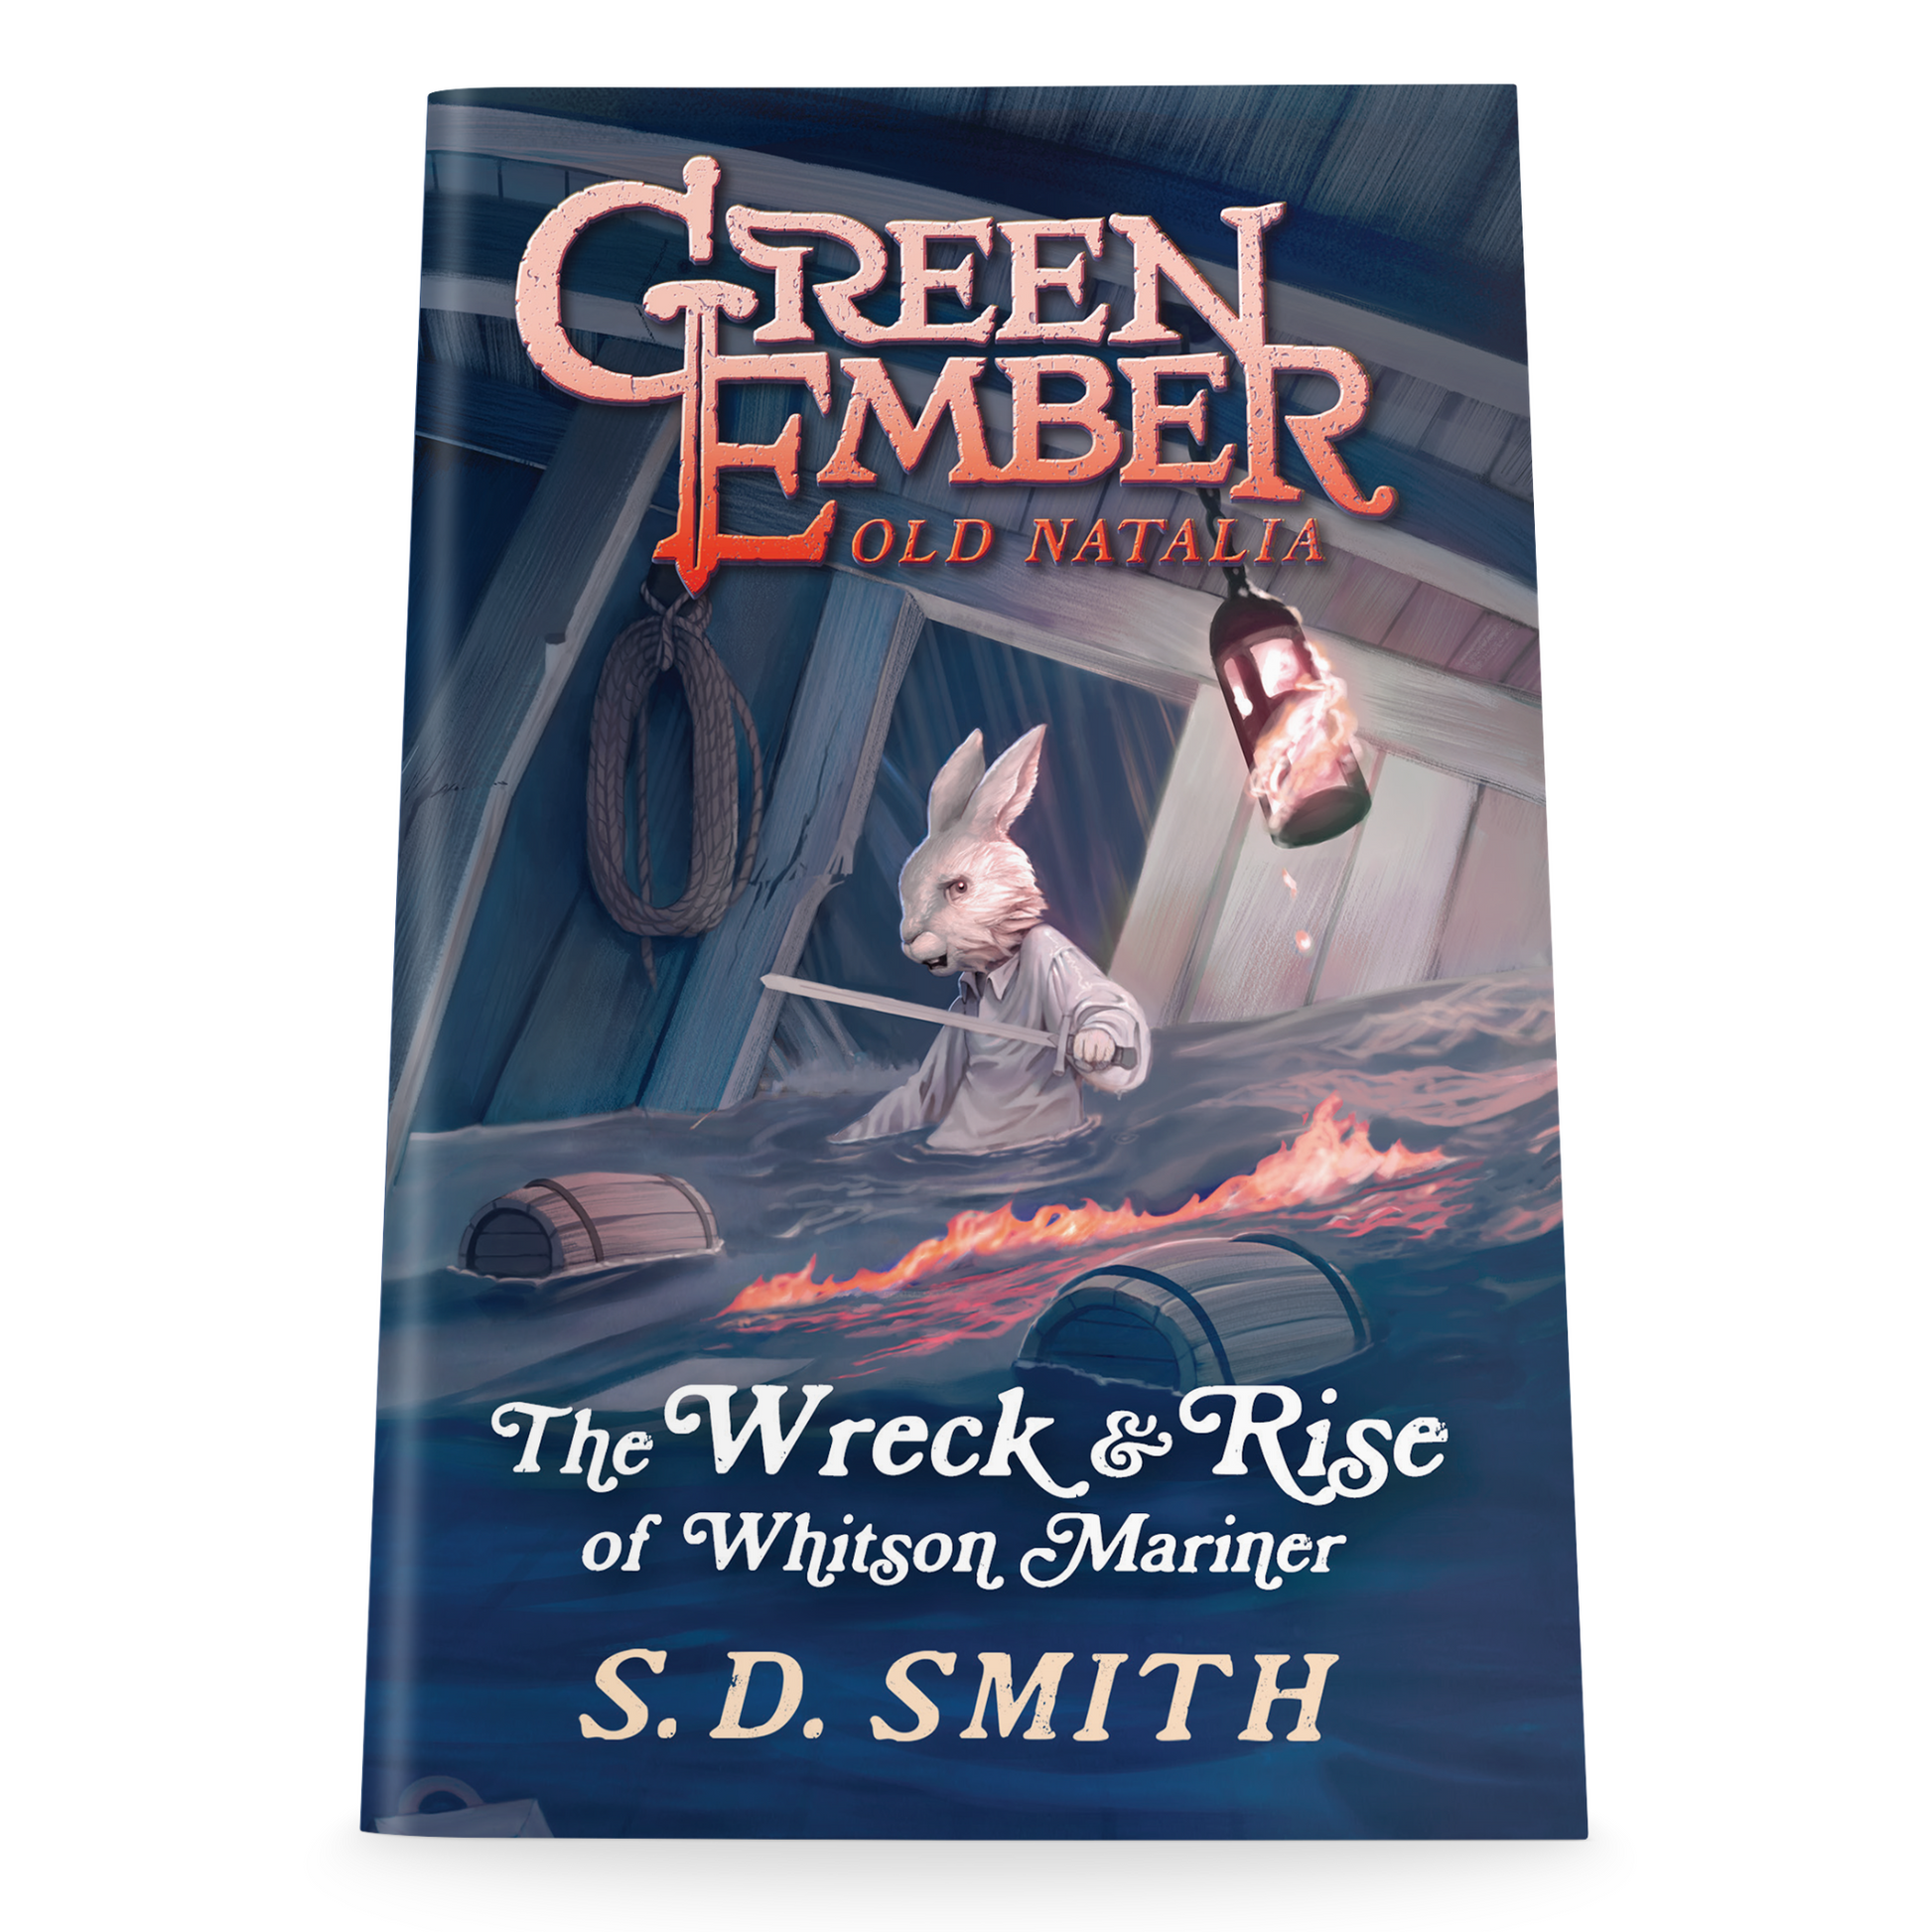 Green Ember Old Natalia The Wreck and Rise of Whitson Mariner